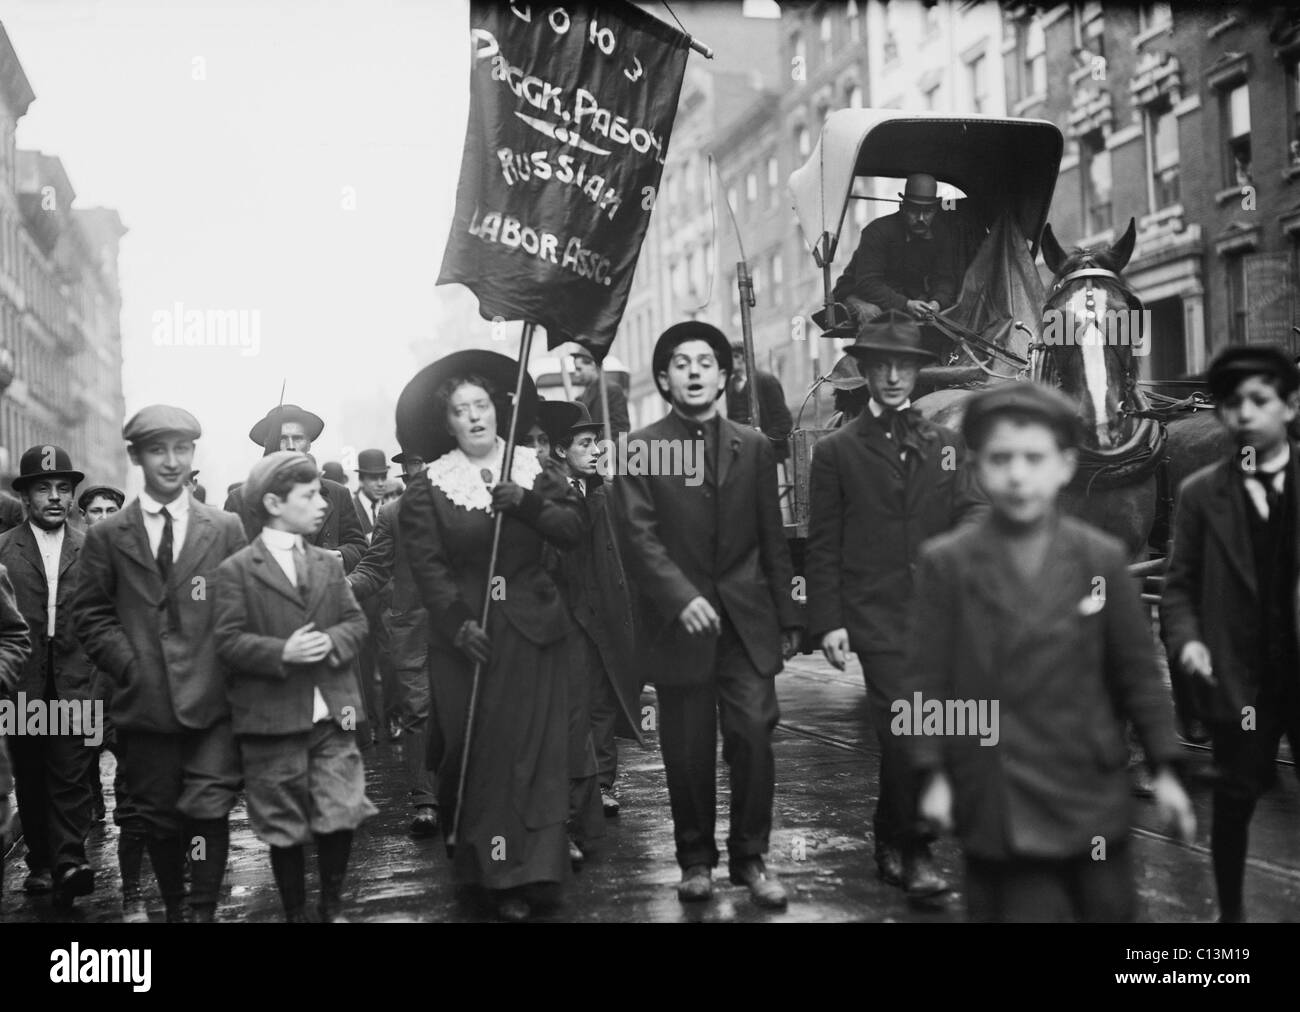 Russian Labor Association marchers at the May Day parade in New York City in 1909. Stock Photo